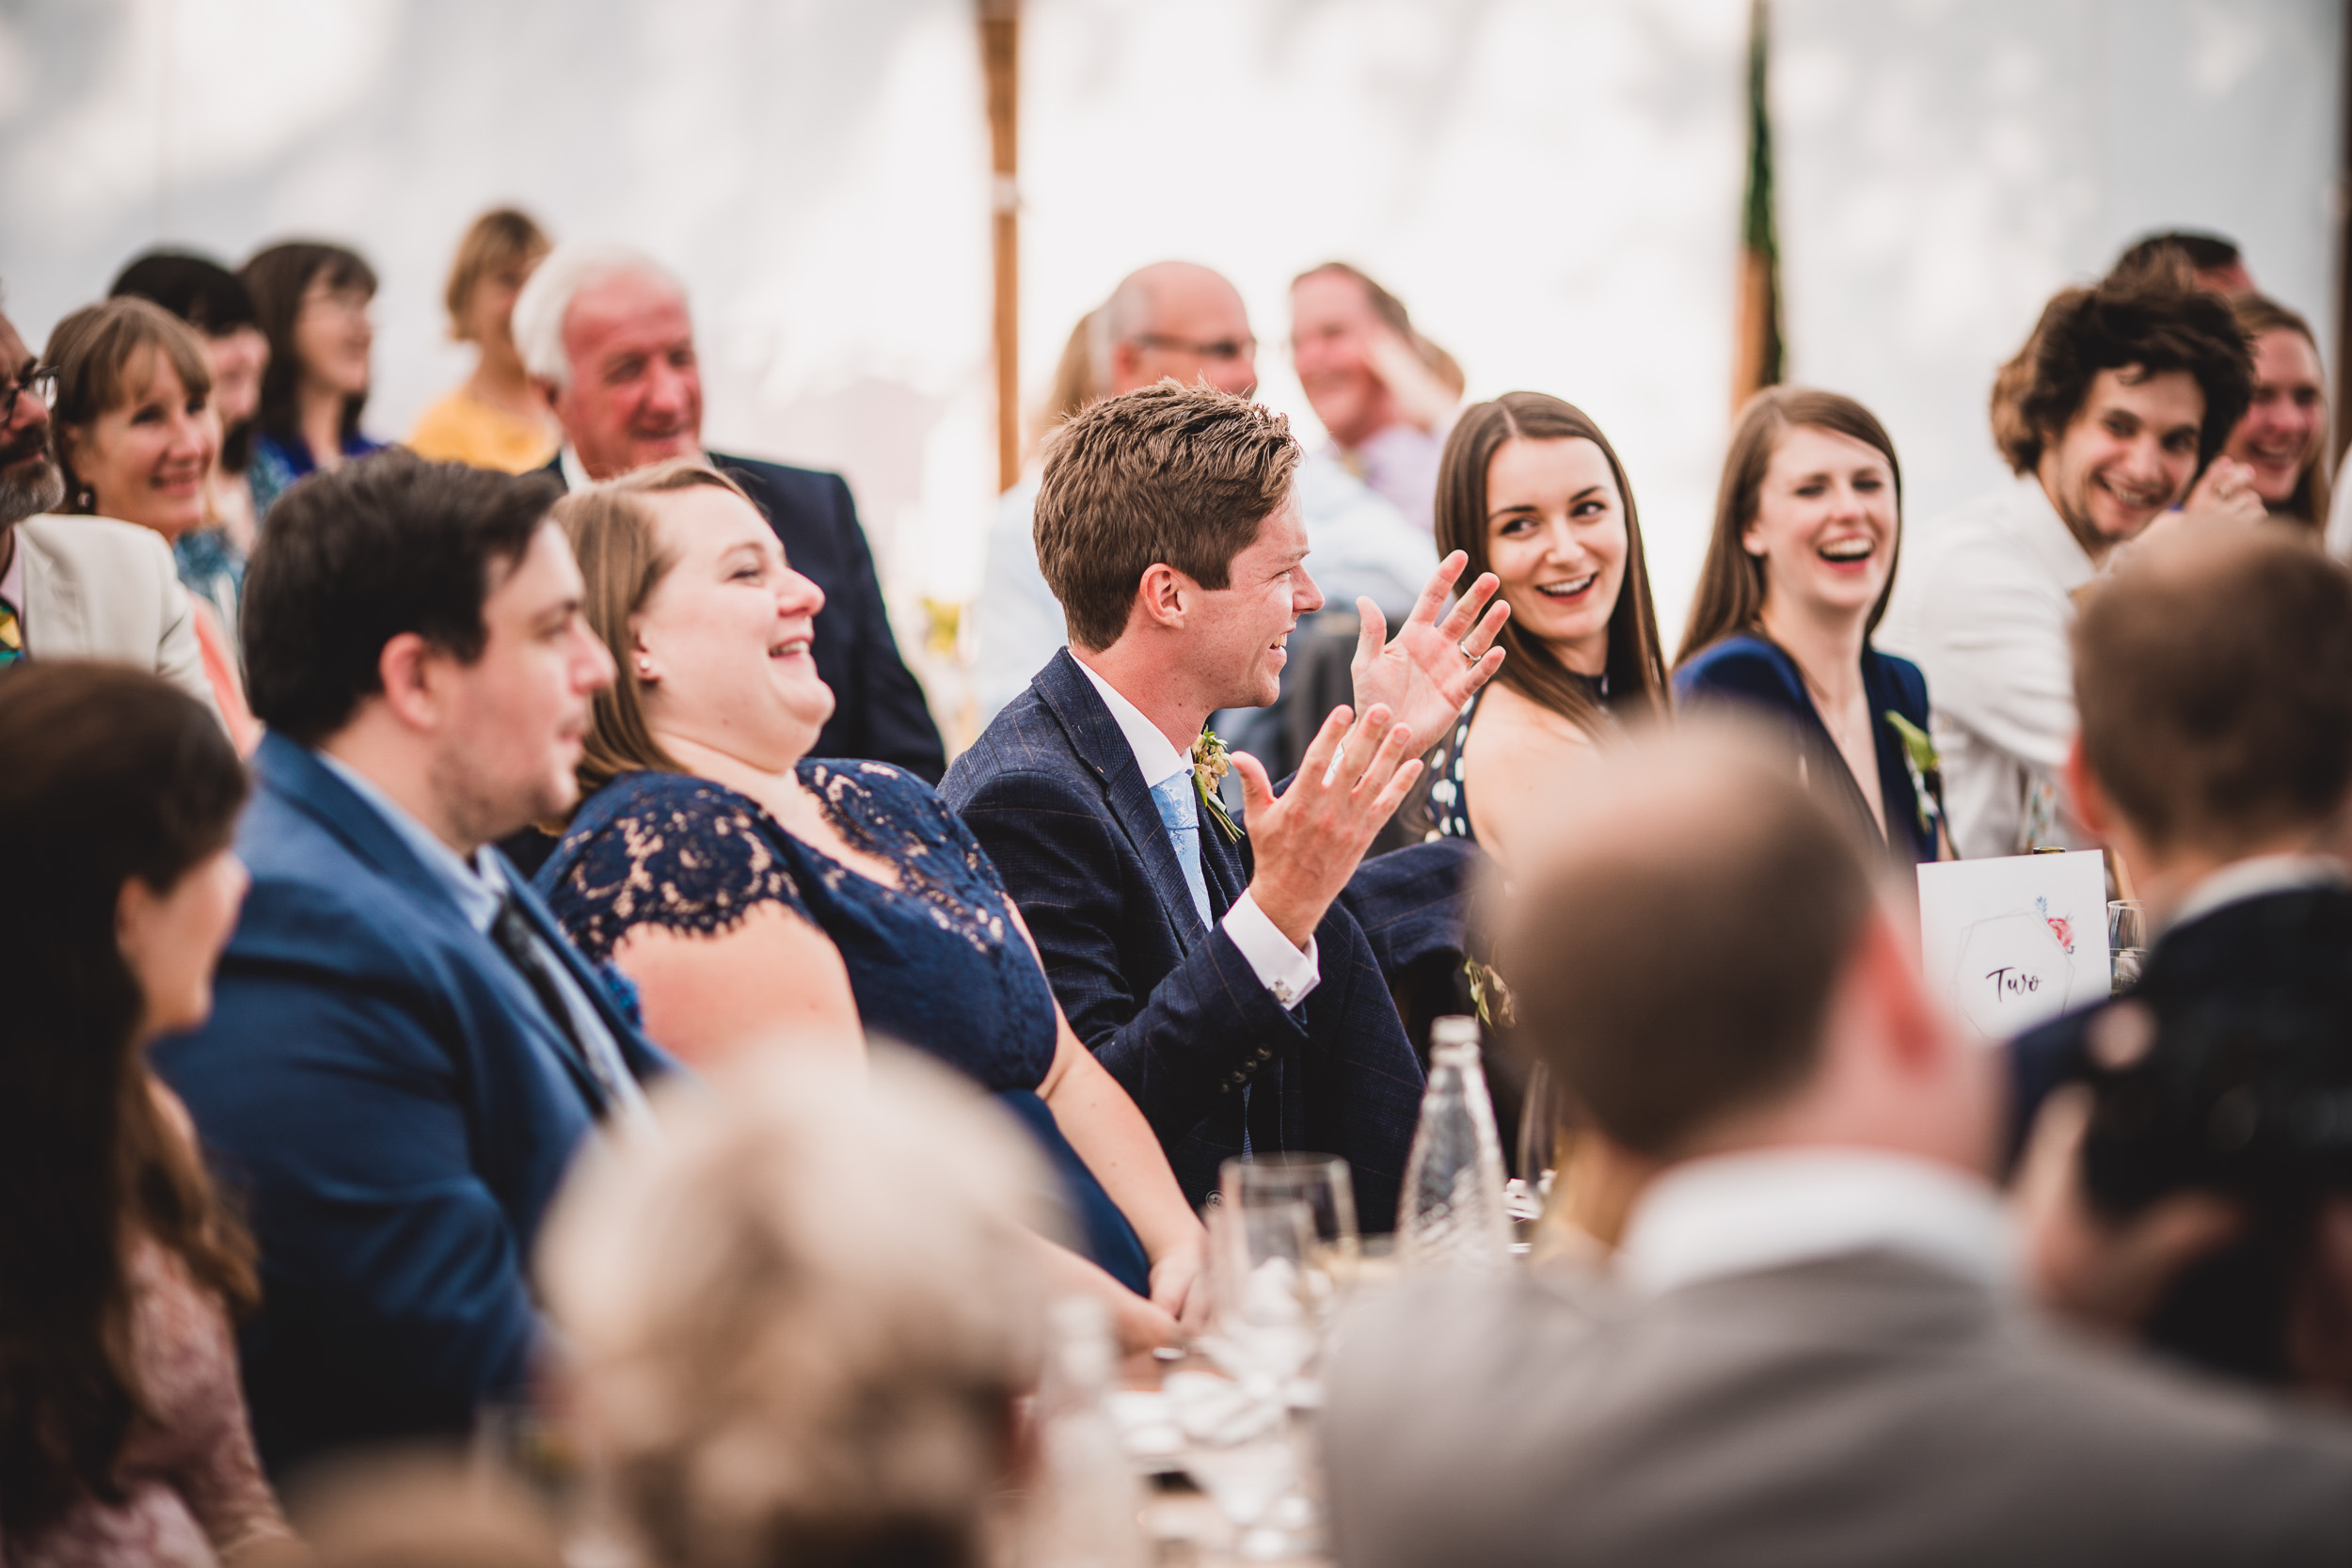 A group of wedding guests enthusiastically clapping in celebration at the bride's reception.